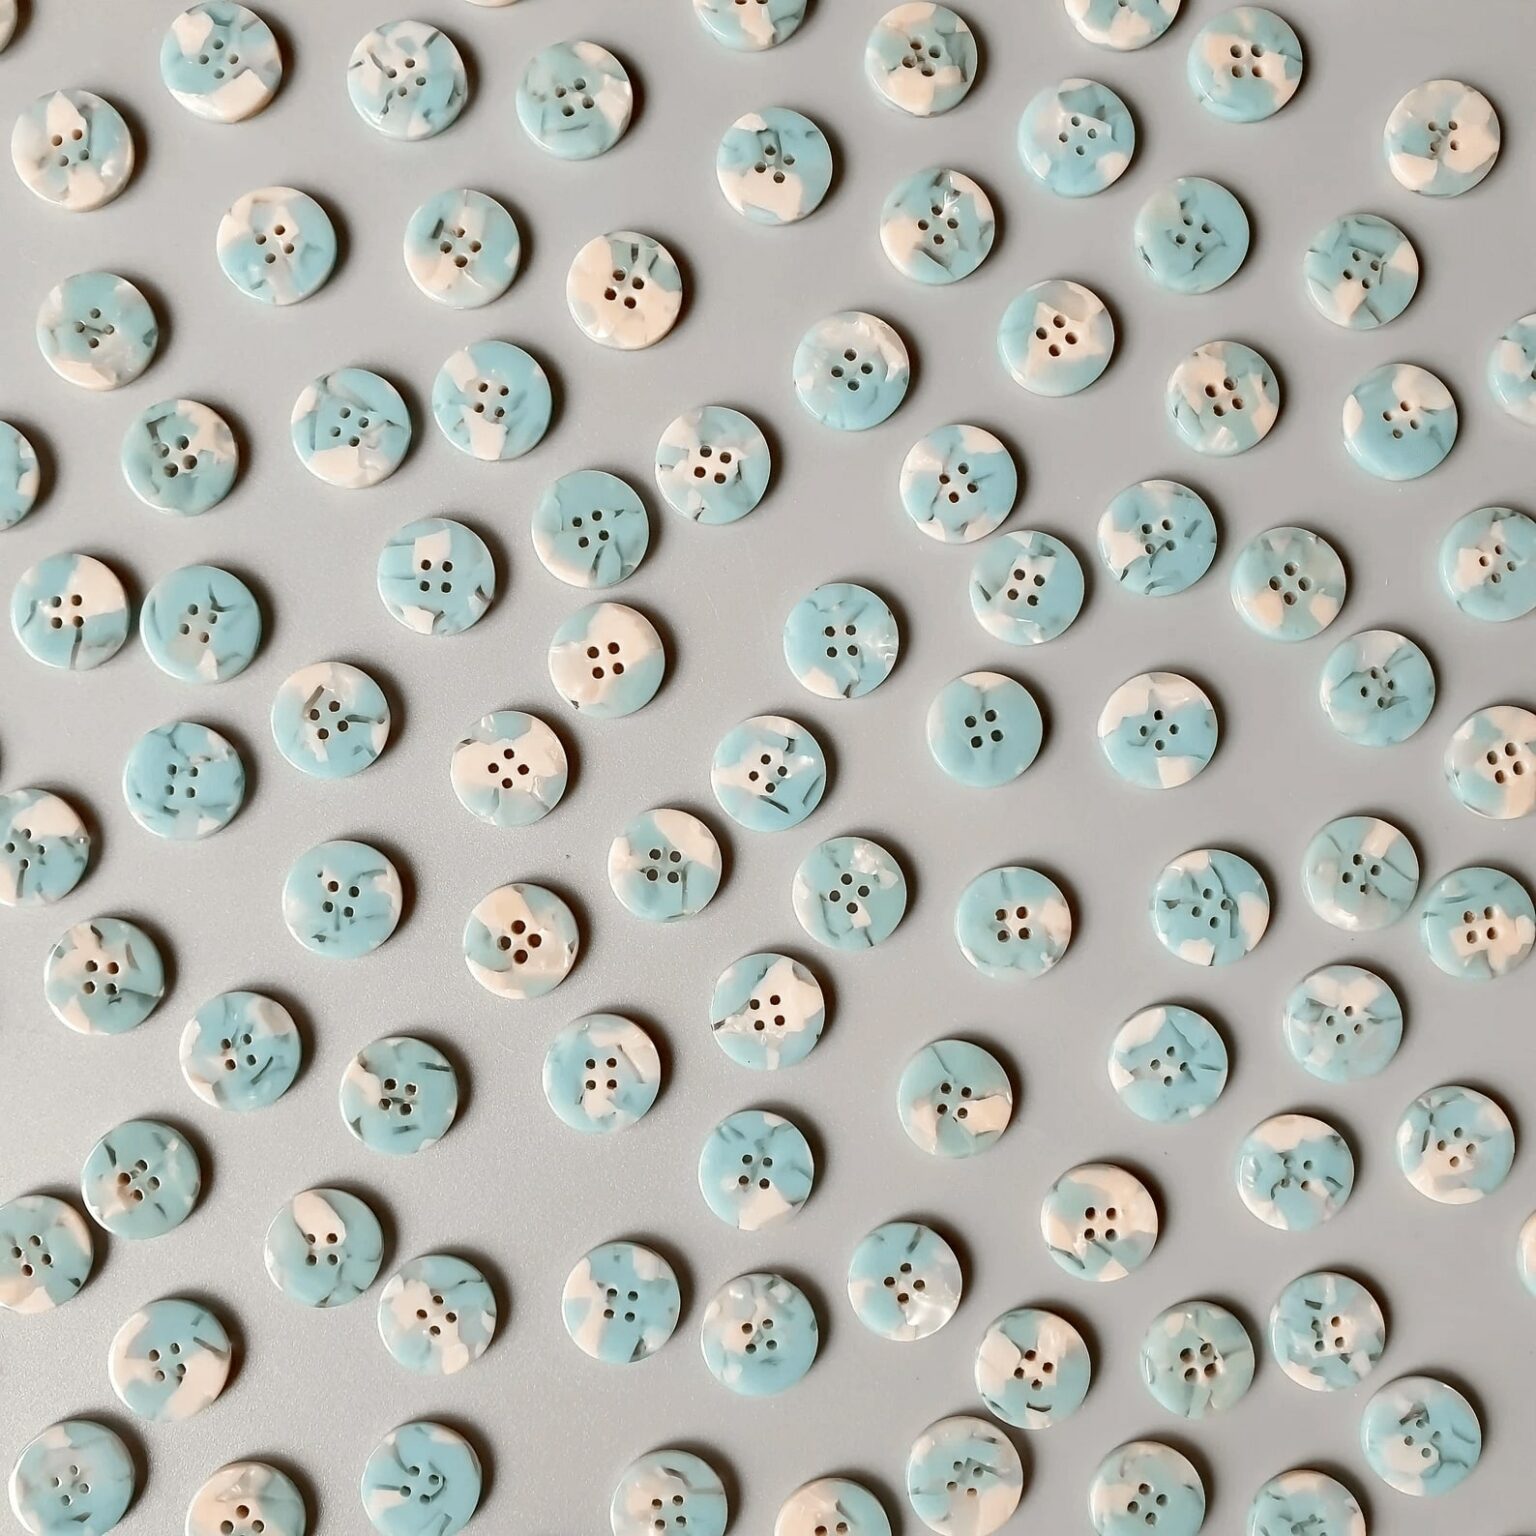 blue and white buttons scattered in an even pattern